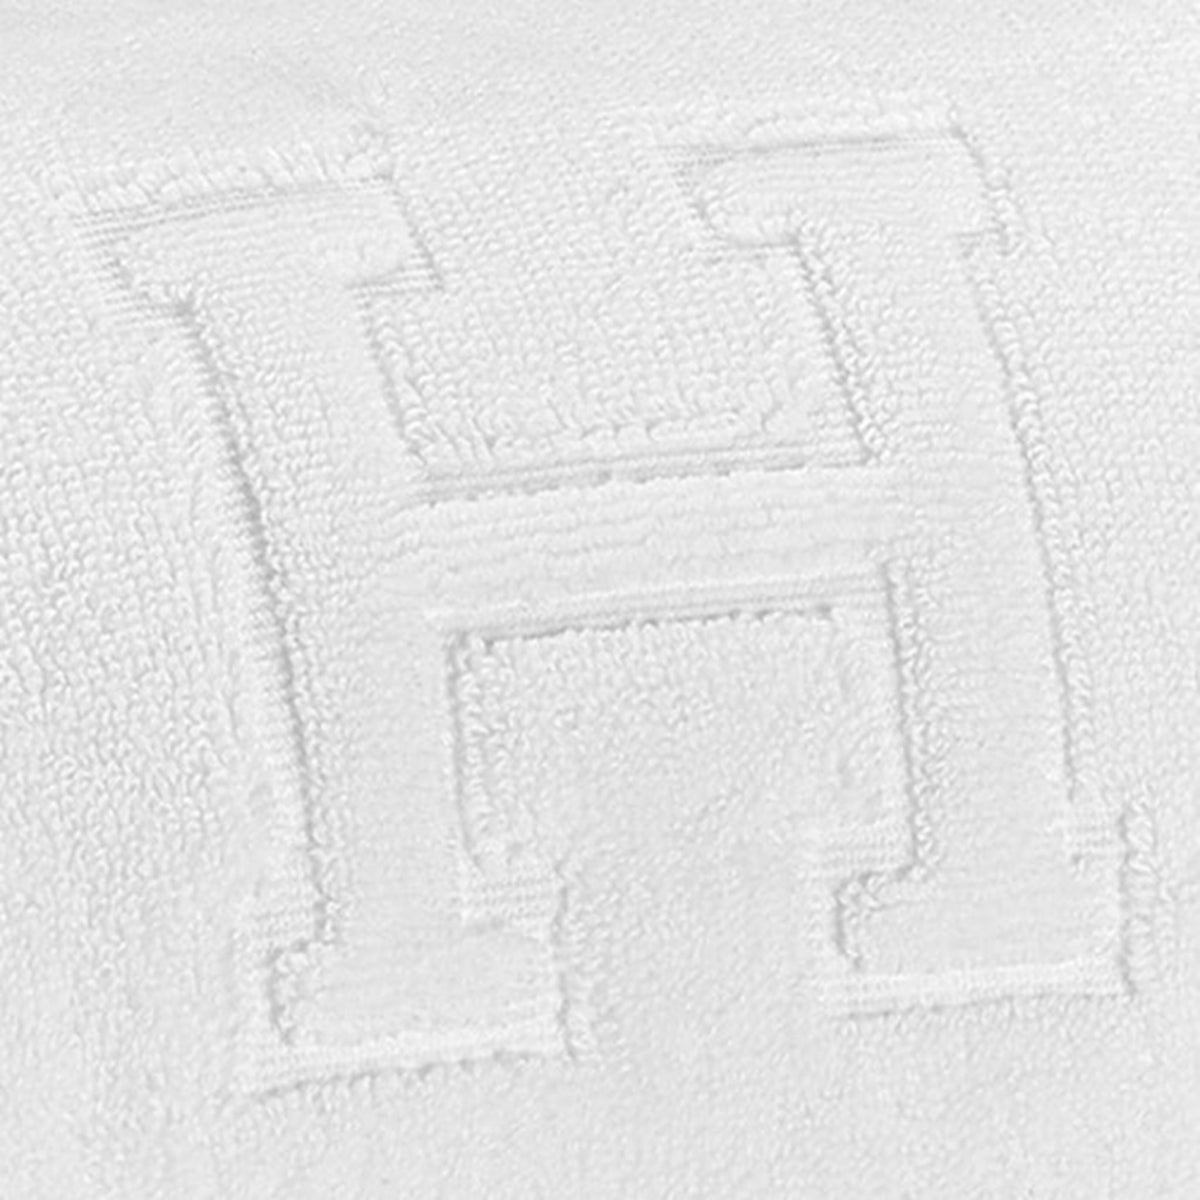 Swatch Sample of Letter H Matouk Auberge Bath Towels